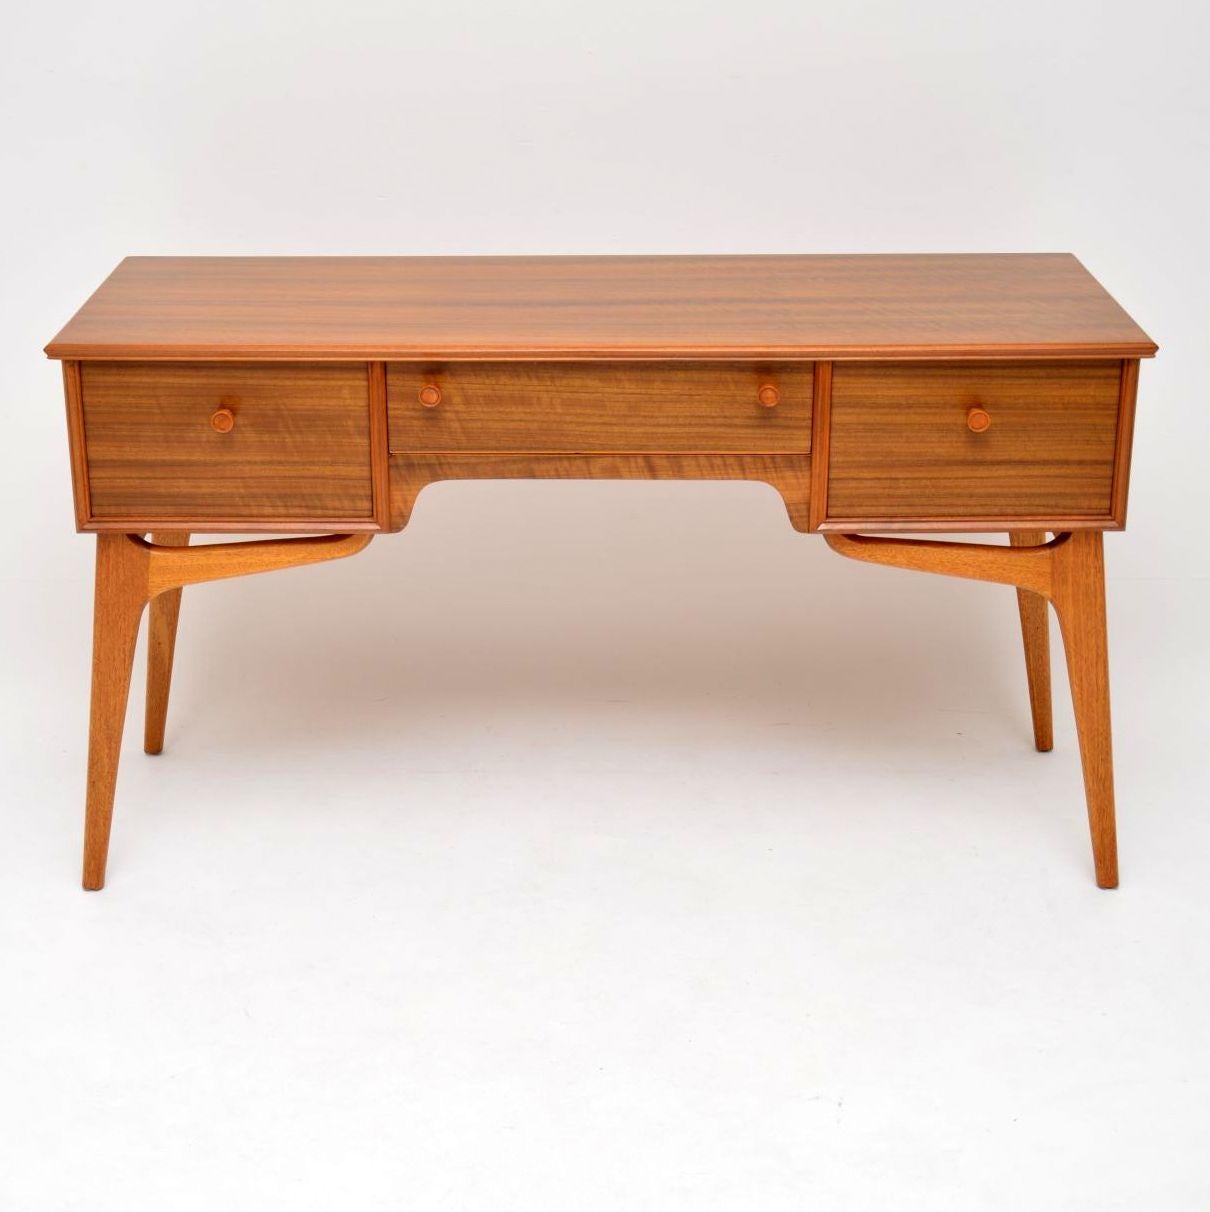 A stylish and practical vintage desk in walnut, this was made by the high end manufacturer Alfred cox, it dates from the 1950s-1960s. The quality is superb, we have had this stripped and re-polished to a very high standard, the condition is